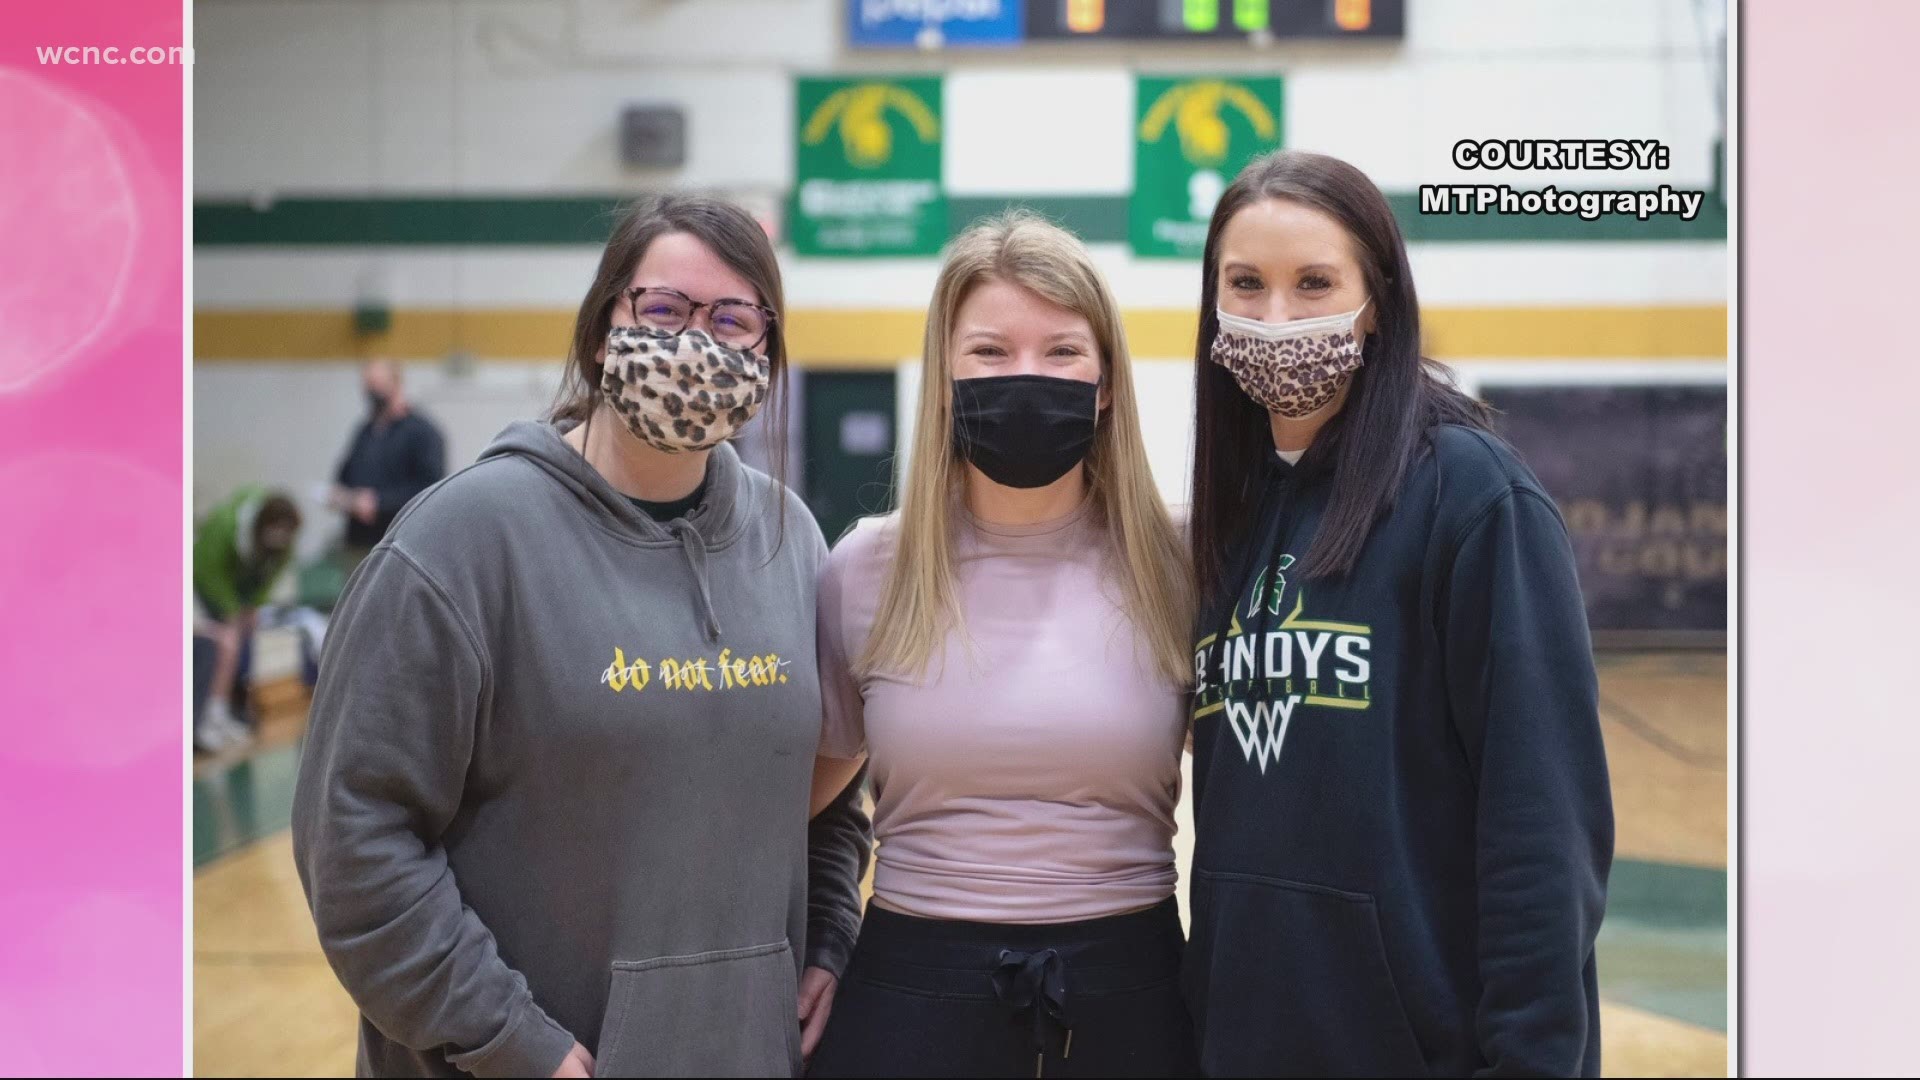 Sydney Wilson was diagnosed with a brain tumor in the fall. Her high school basketball team held a shoot-a-thon to fundraise and help cover her medical expenses.